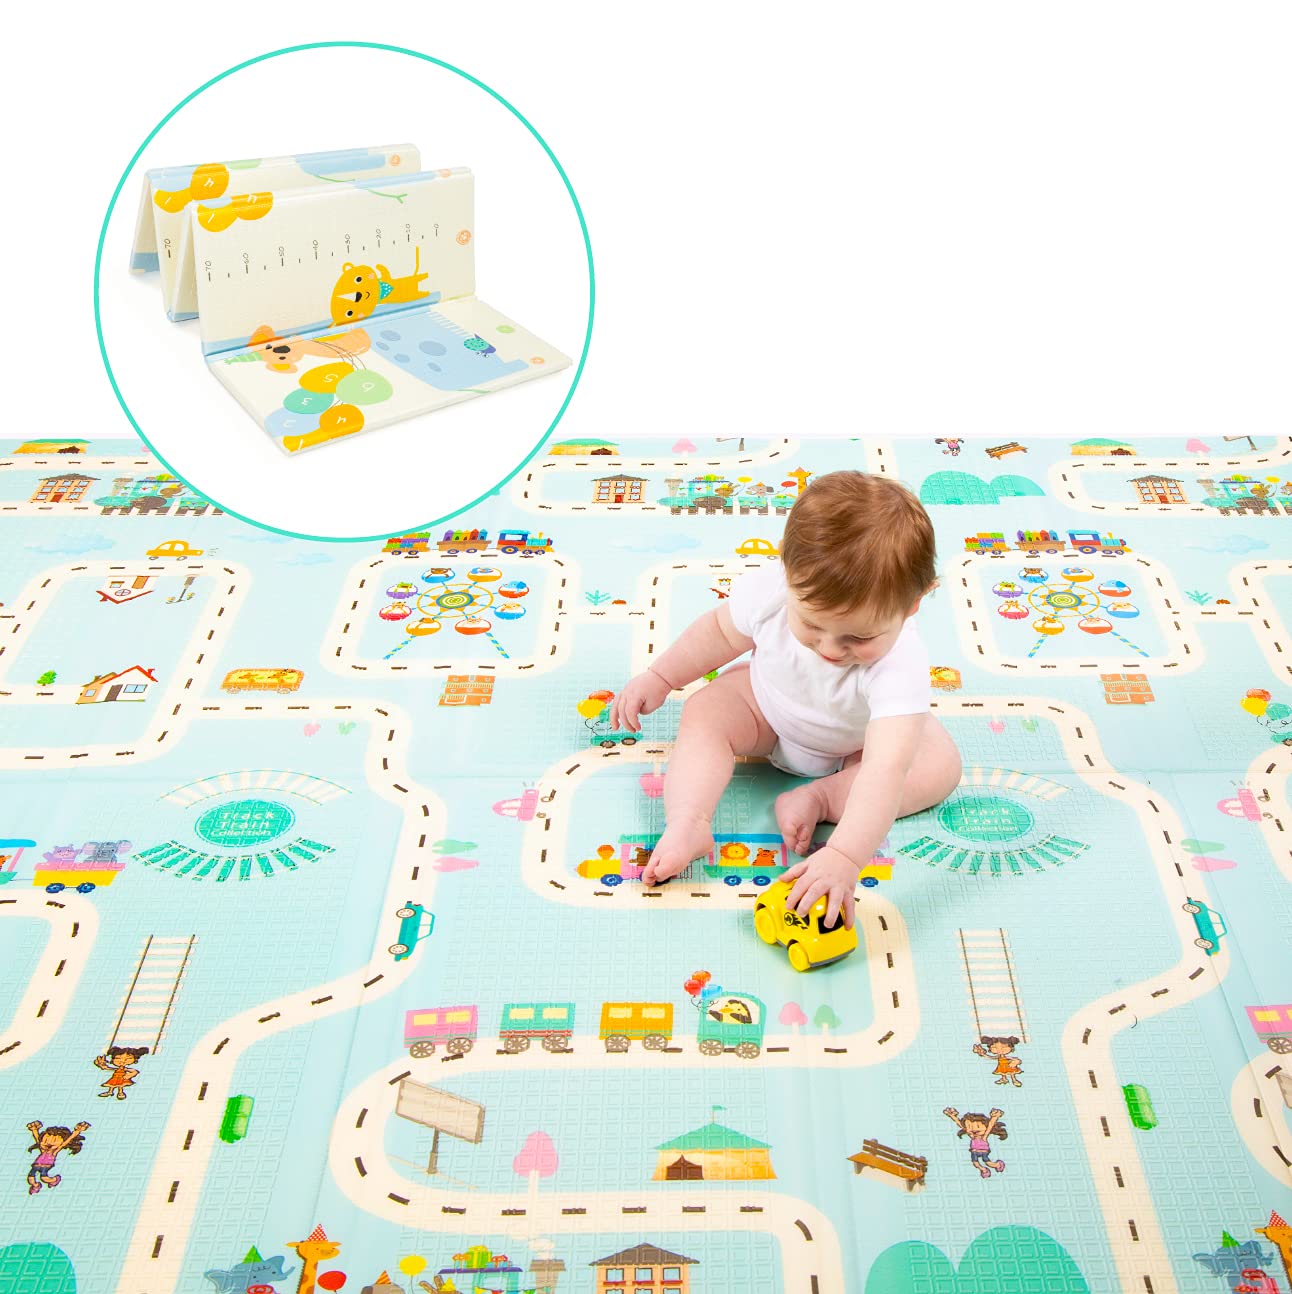 Milliard Baby Foam Playmat, Thick Foam Crawling Mat for Babies and Toddler - Foldable/Portable/Waterproof/Non-Toxic (Large 195 x 177 x 1.5cm)